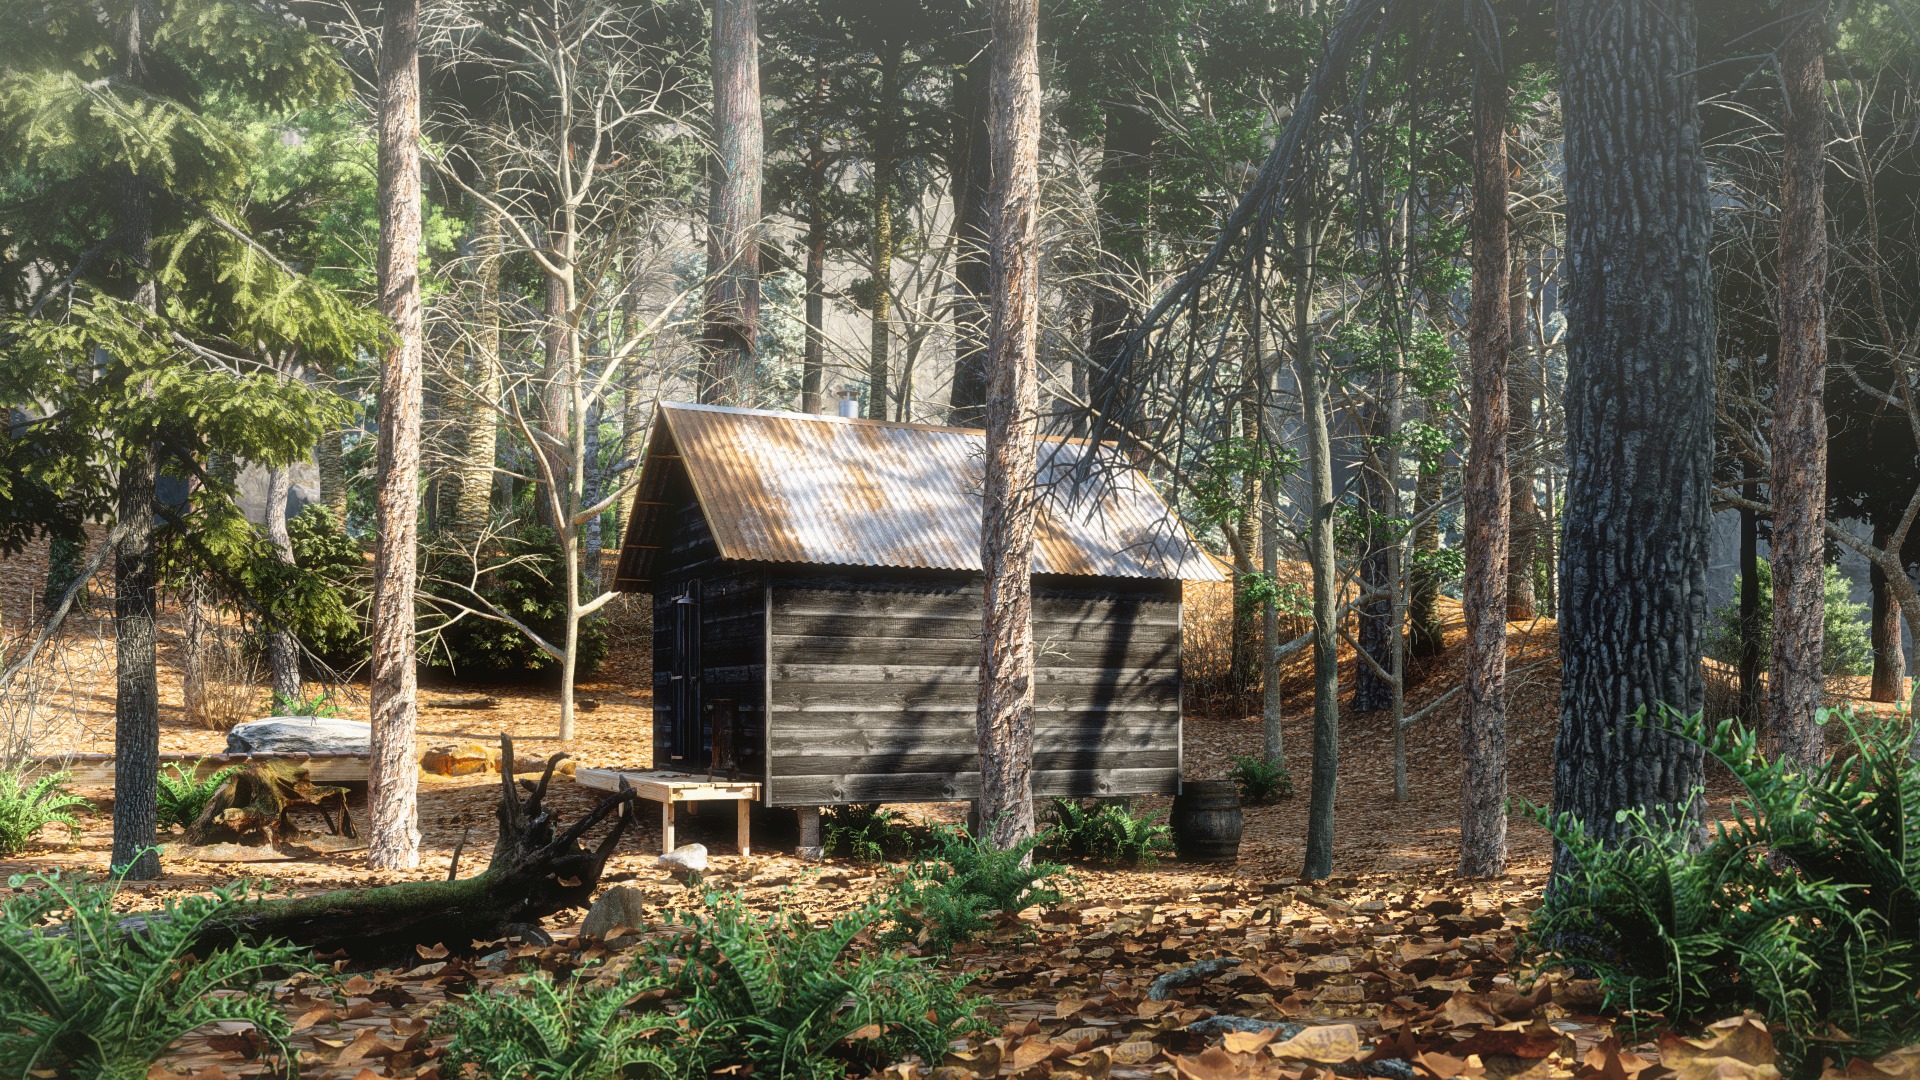 Cabin in the forest, rendered in Lumion by D.Wulf